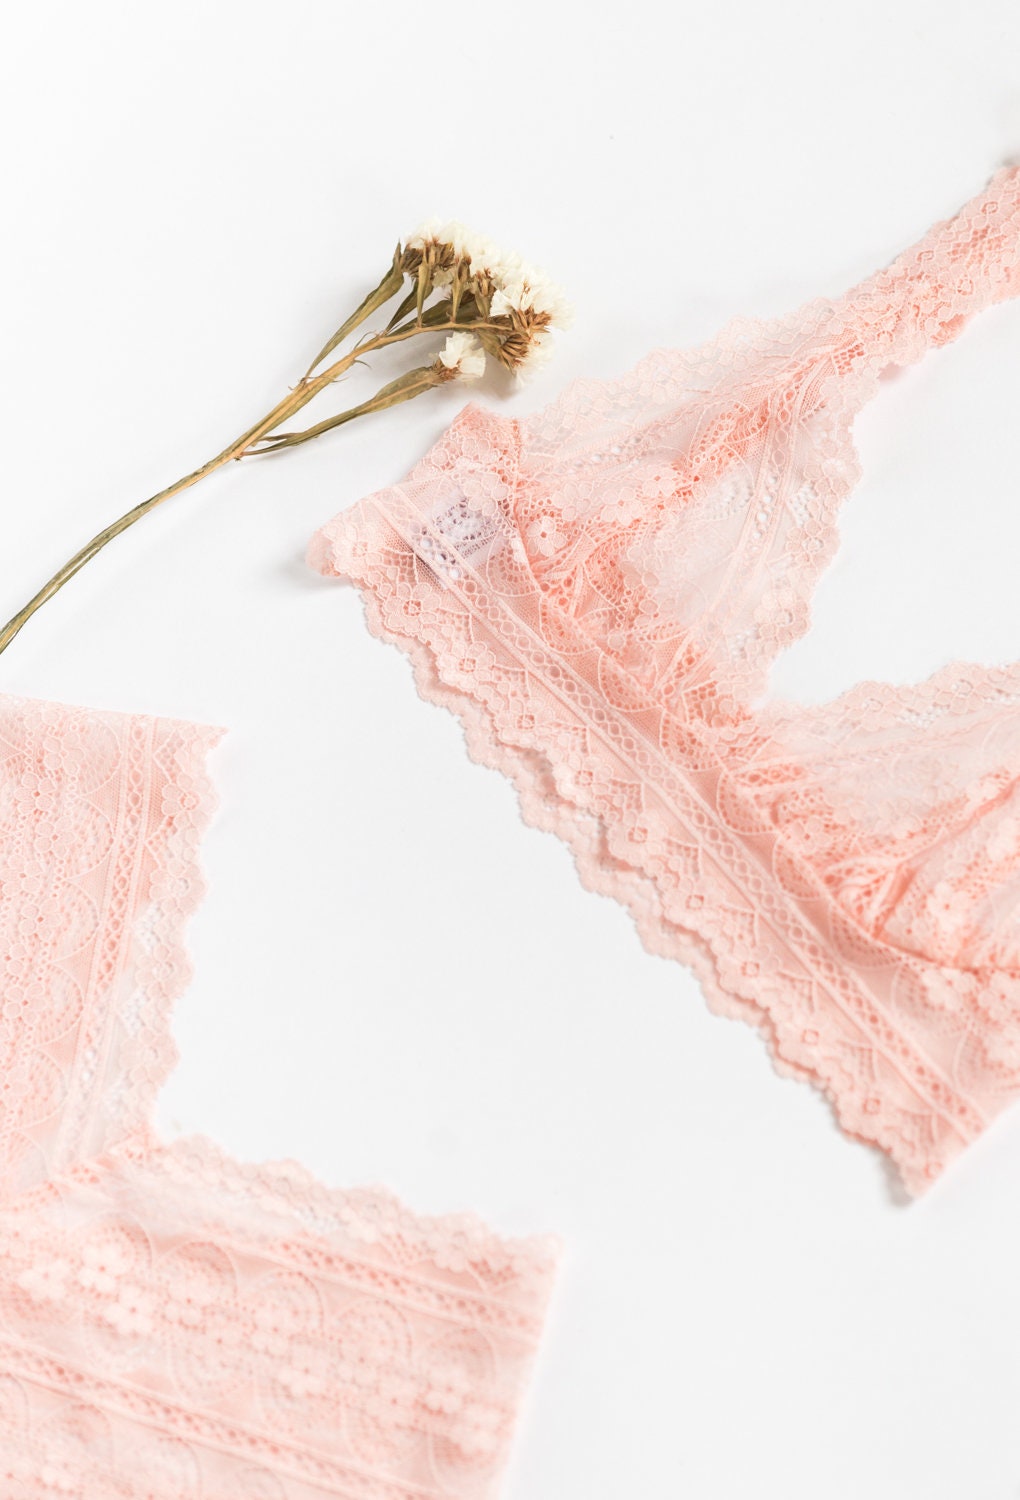 Tea Rose Pale Pink Lace Lace Bralette and French Knicker Set Pretty Pink  Lace Lingerie From Brighton Lace 